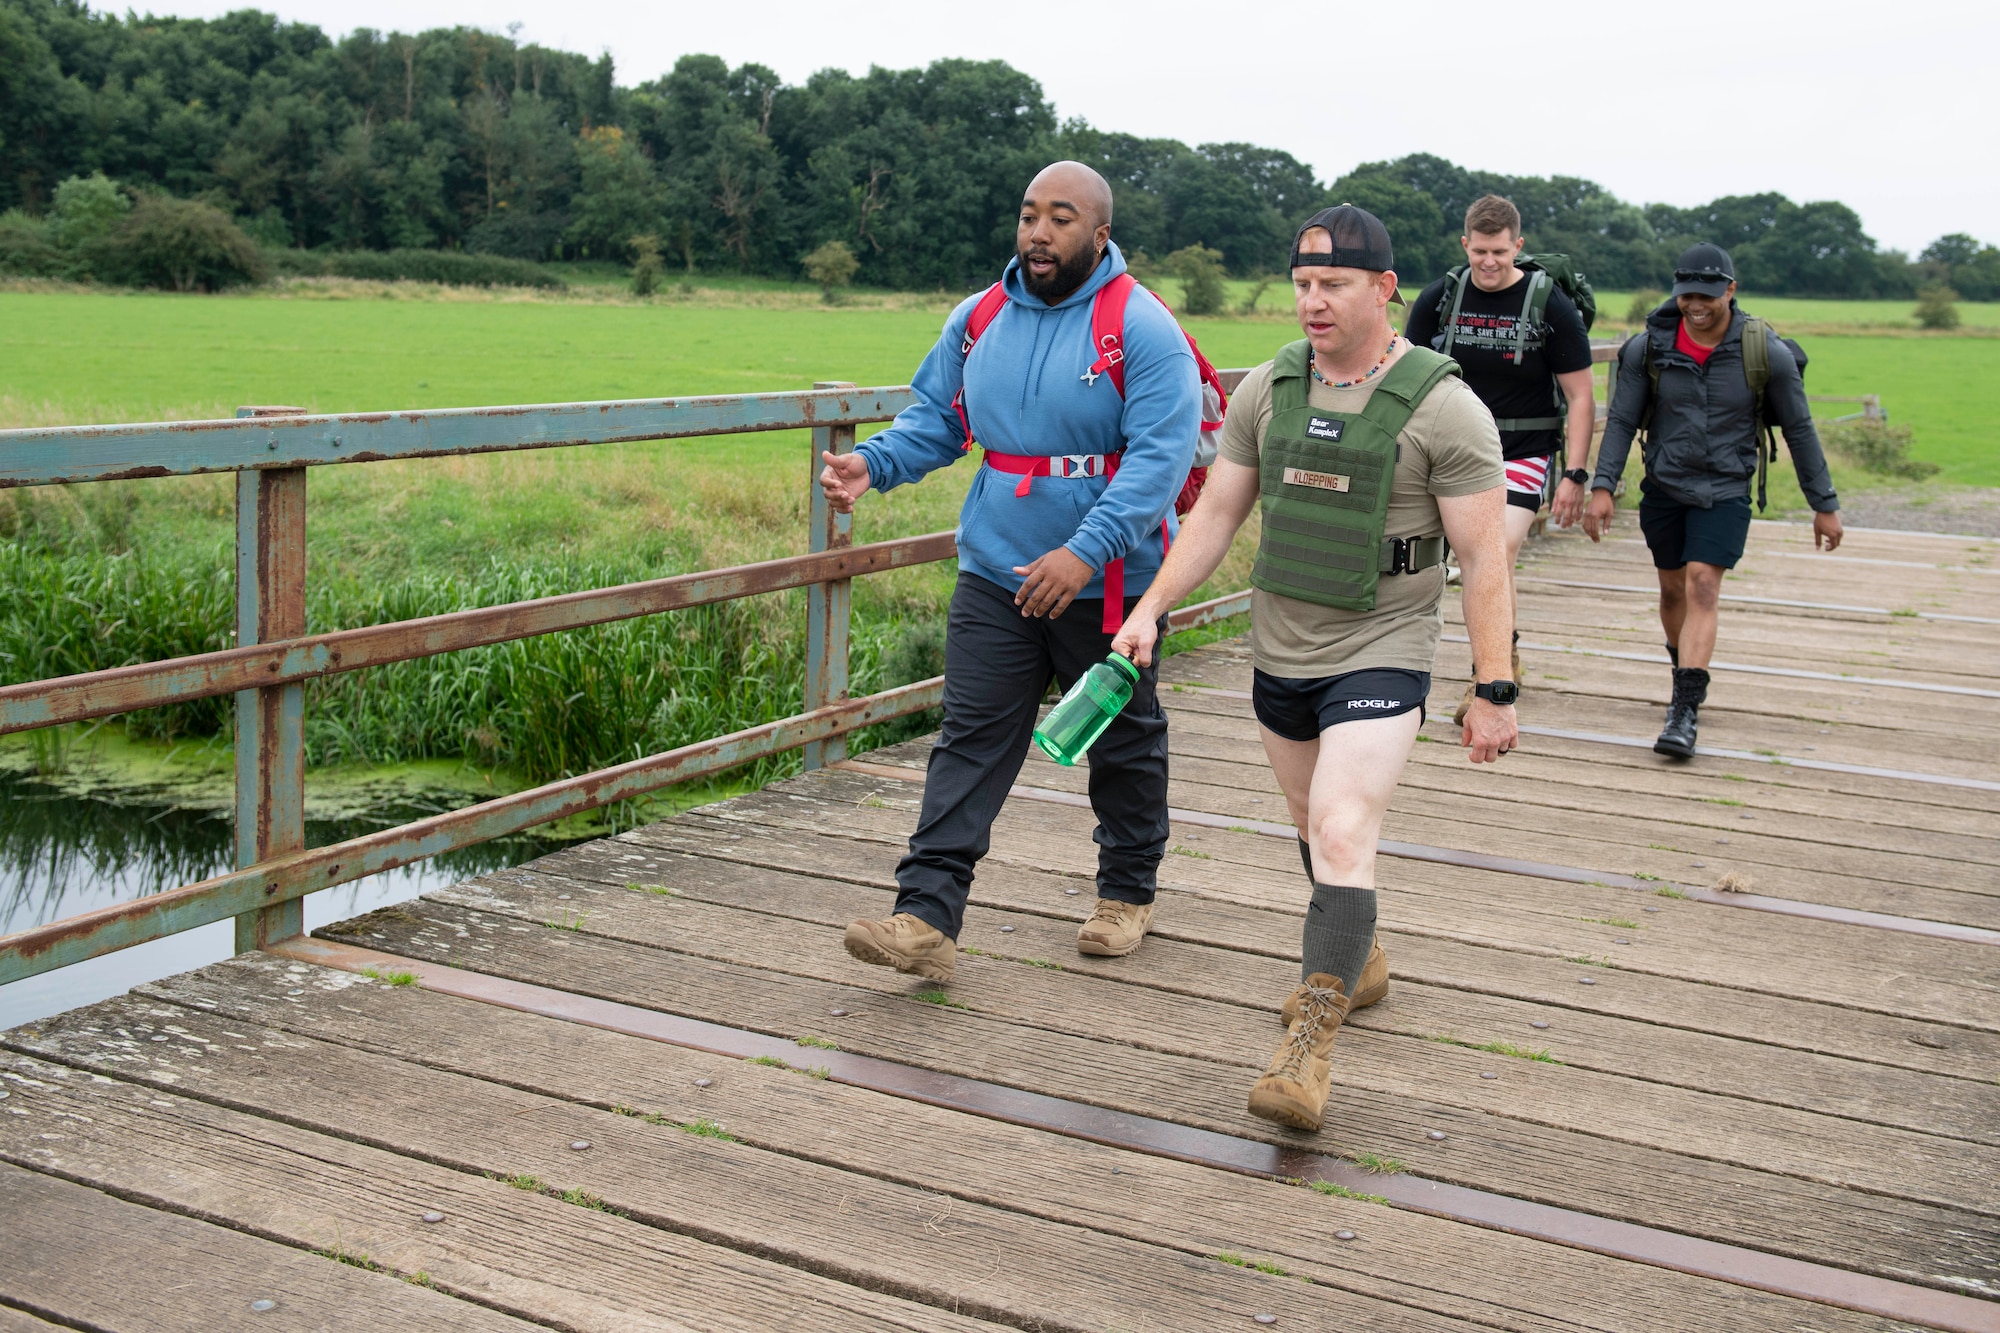 U.S. and U.K. veterans and active-duty military members from across the United Kingdom join together to train for the Irreverent Warriors Silkies Hike in Hemingford Grey, United Kingdom, Aug. 21, 2021. (U.S. Air Force photo by Senior Airman Jennifer Zima)